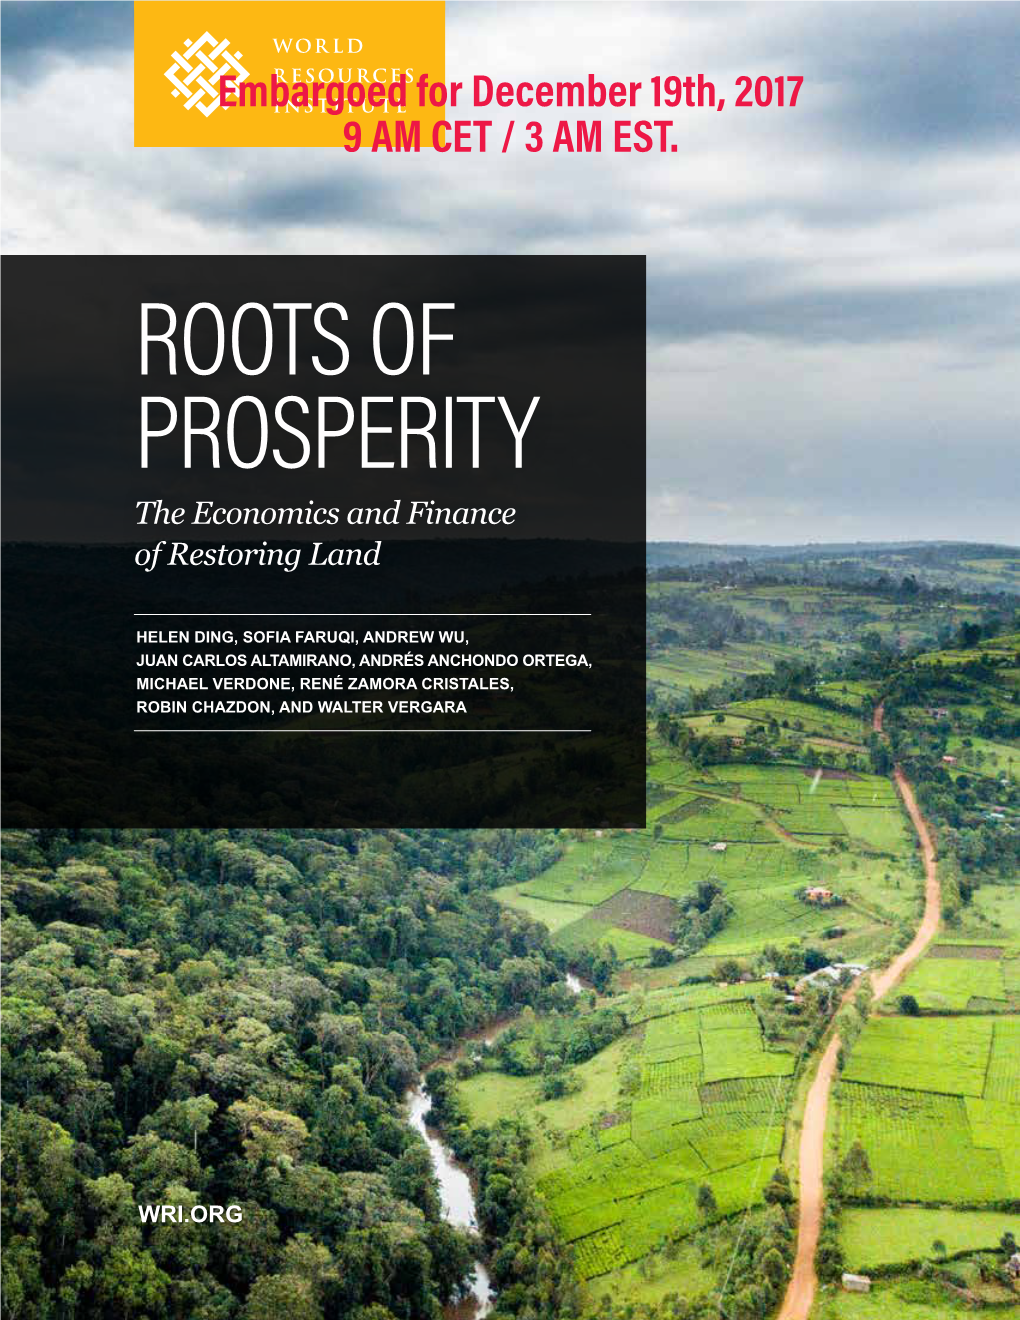 ROOTS of PROSPERITY the Economics and Finance of Restoring Land